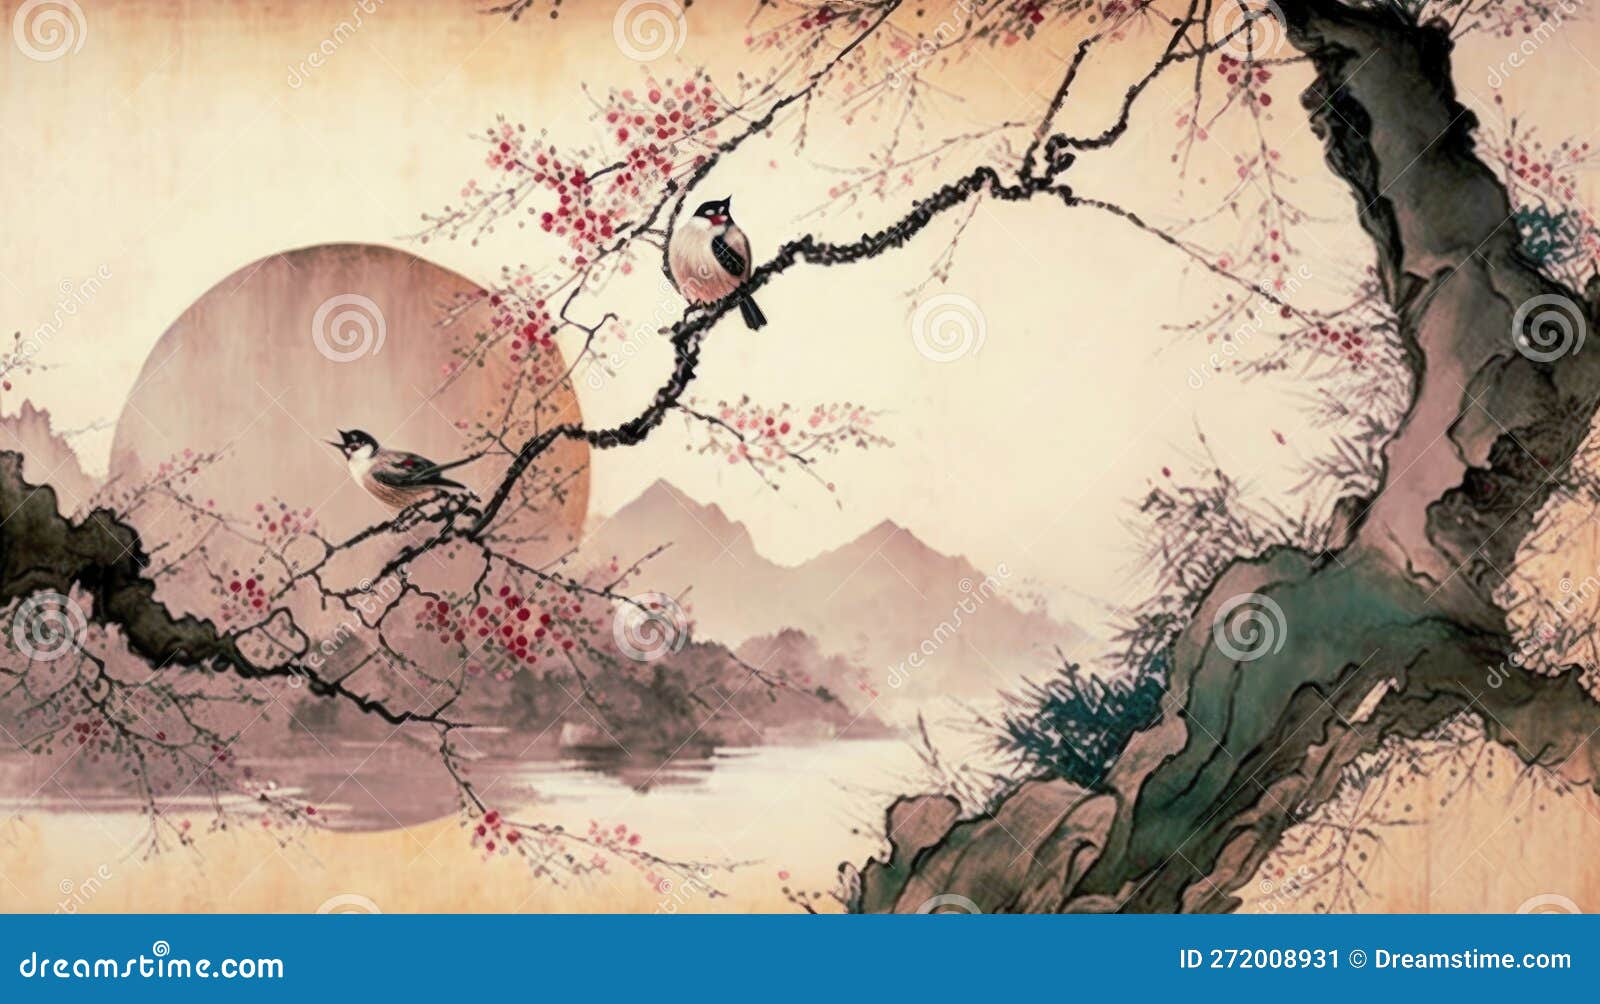 30+ Artistic Japanese HD Wallpapers and Backgrounds